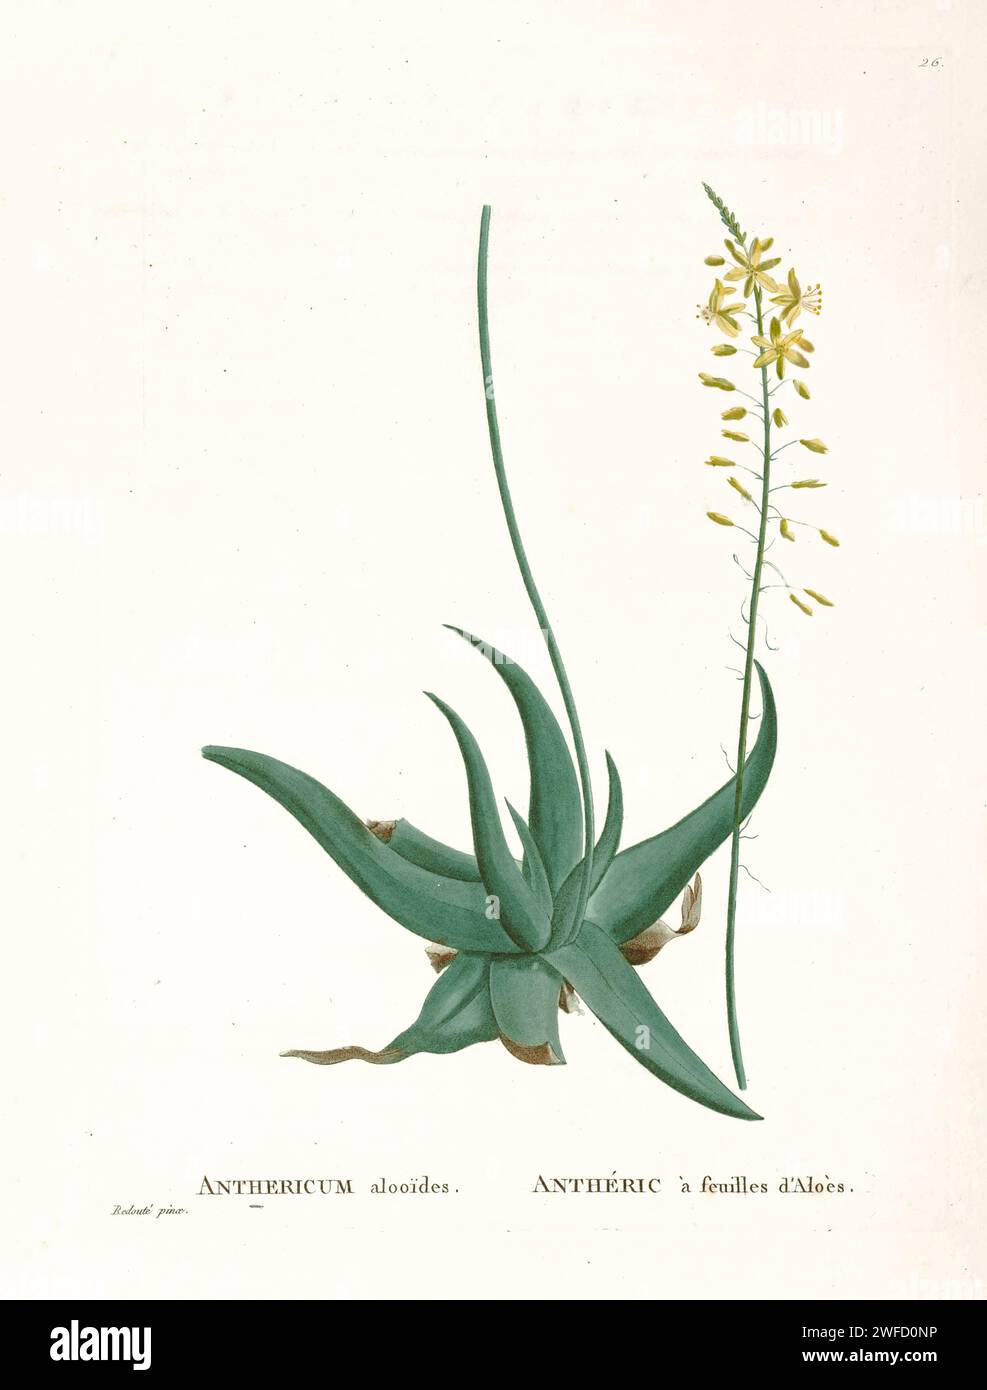 Anthericum alooides Bulbine alooides (L.) Willd. from History of Succulent Plants [Plantarum historia succulentarum / Histoire des plantes grasses] painted by Pierre-Joseph Redouté and described by Augustin Pyramus de Candolle Bulbine alooides is a species of geophytic plant in the genus Bulbine. It is endemic to South Africa, where it grows in the Cape Provinces, KwaZulu-Natal, and Northern Provinces. It is widespread in rocky areas in the southern Cape Region. Stock Photo